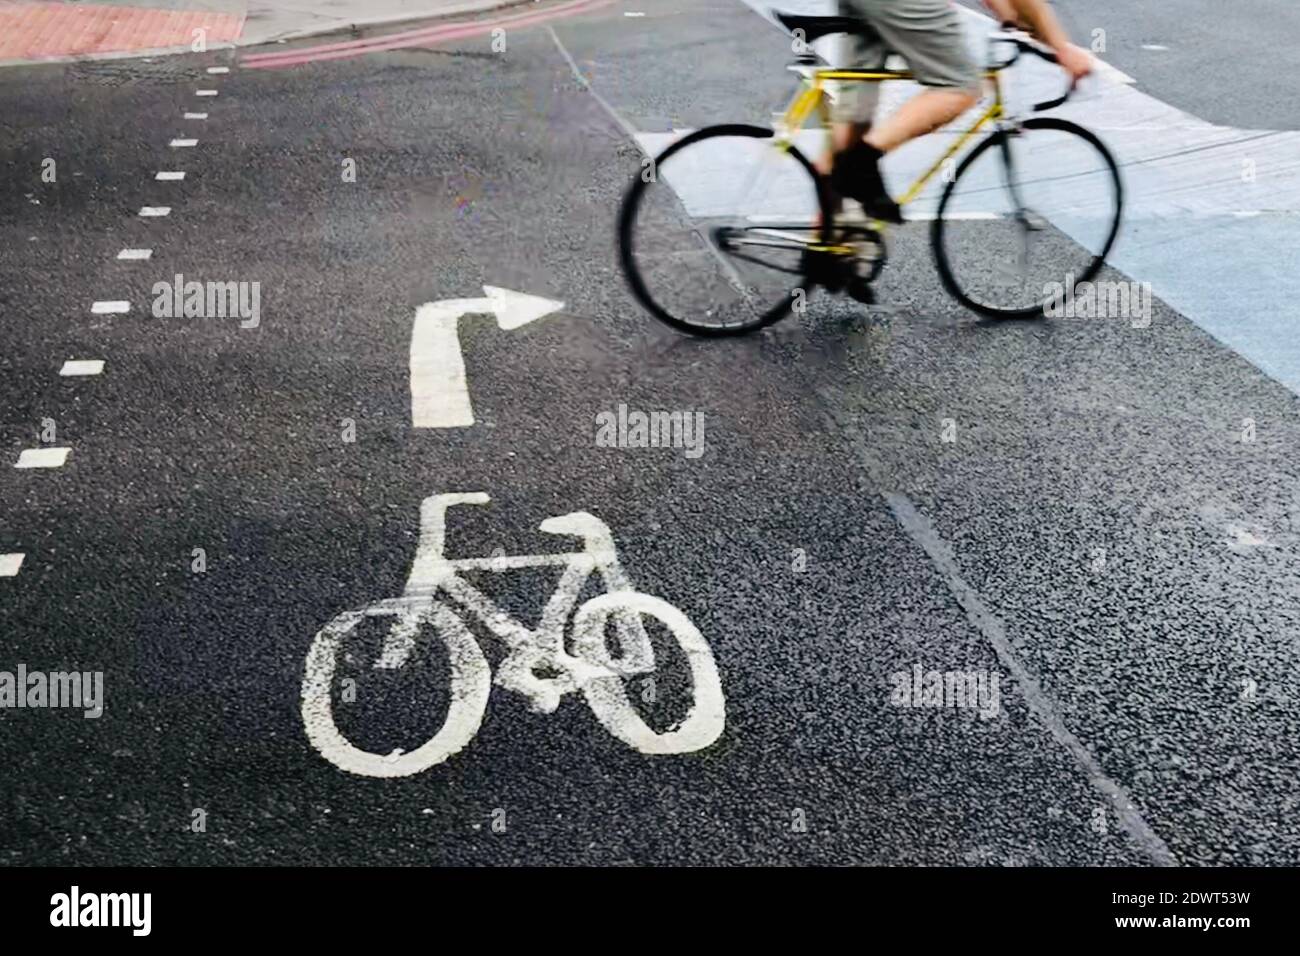 Low Section Of Man Cycling On Street In City Stock Photo